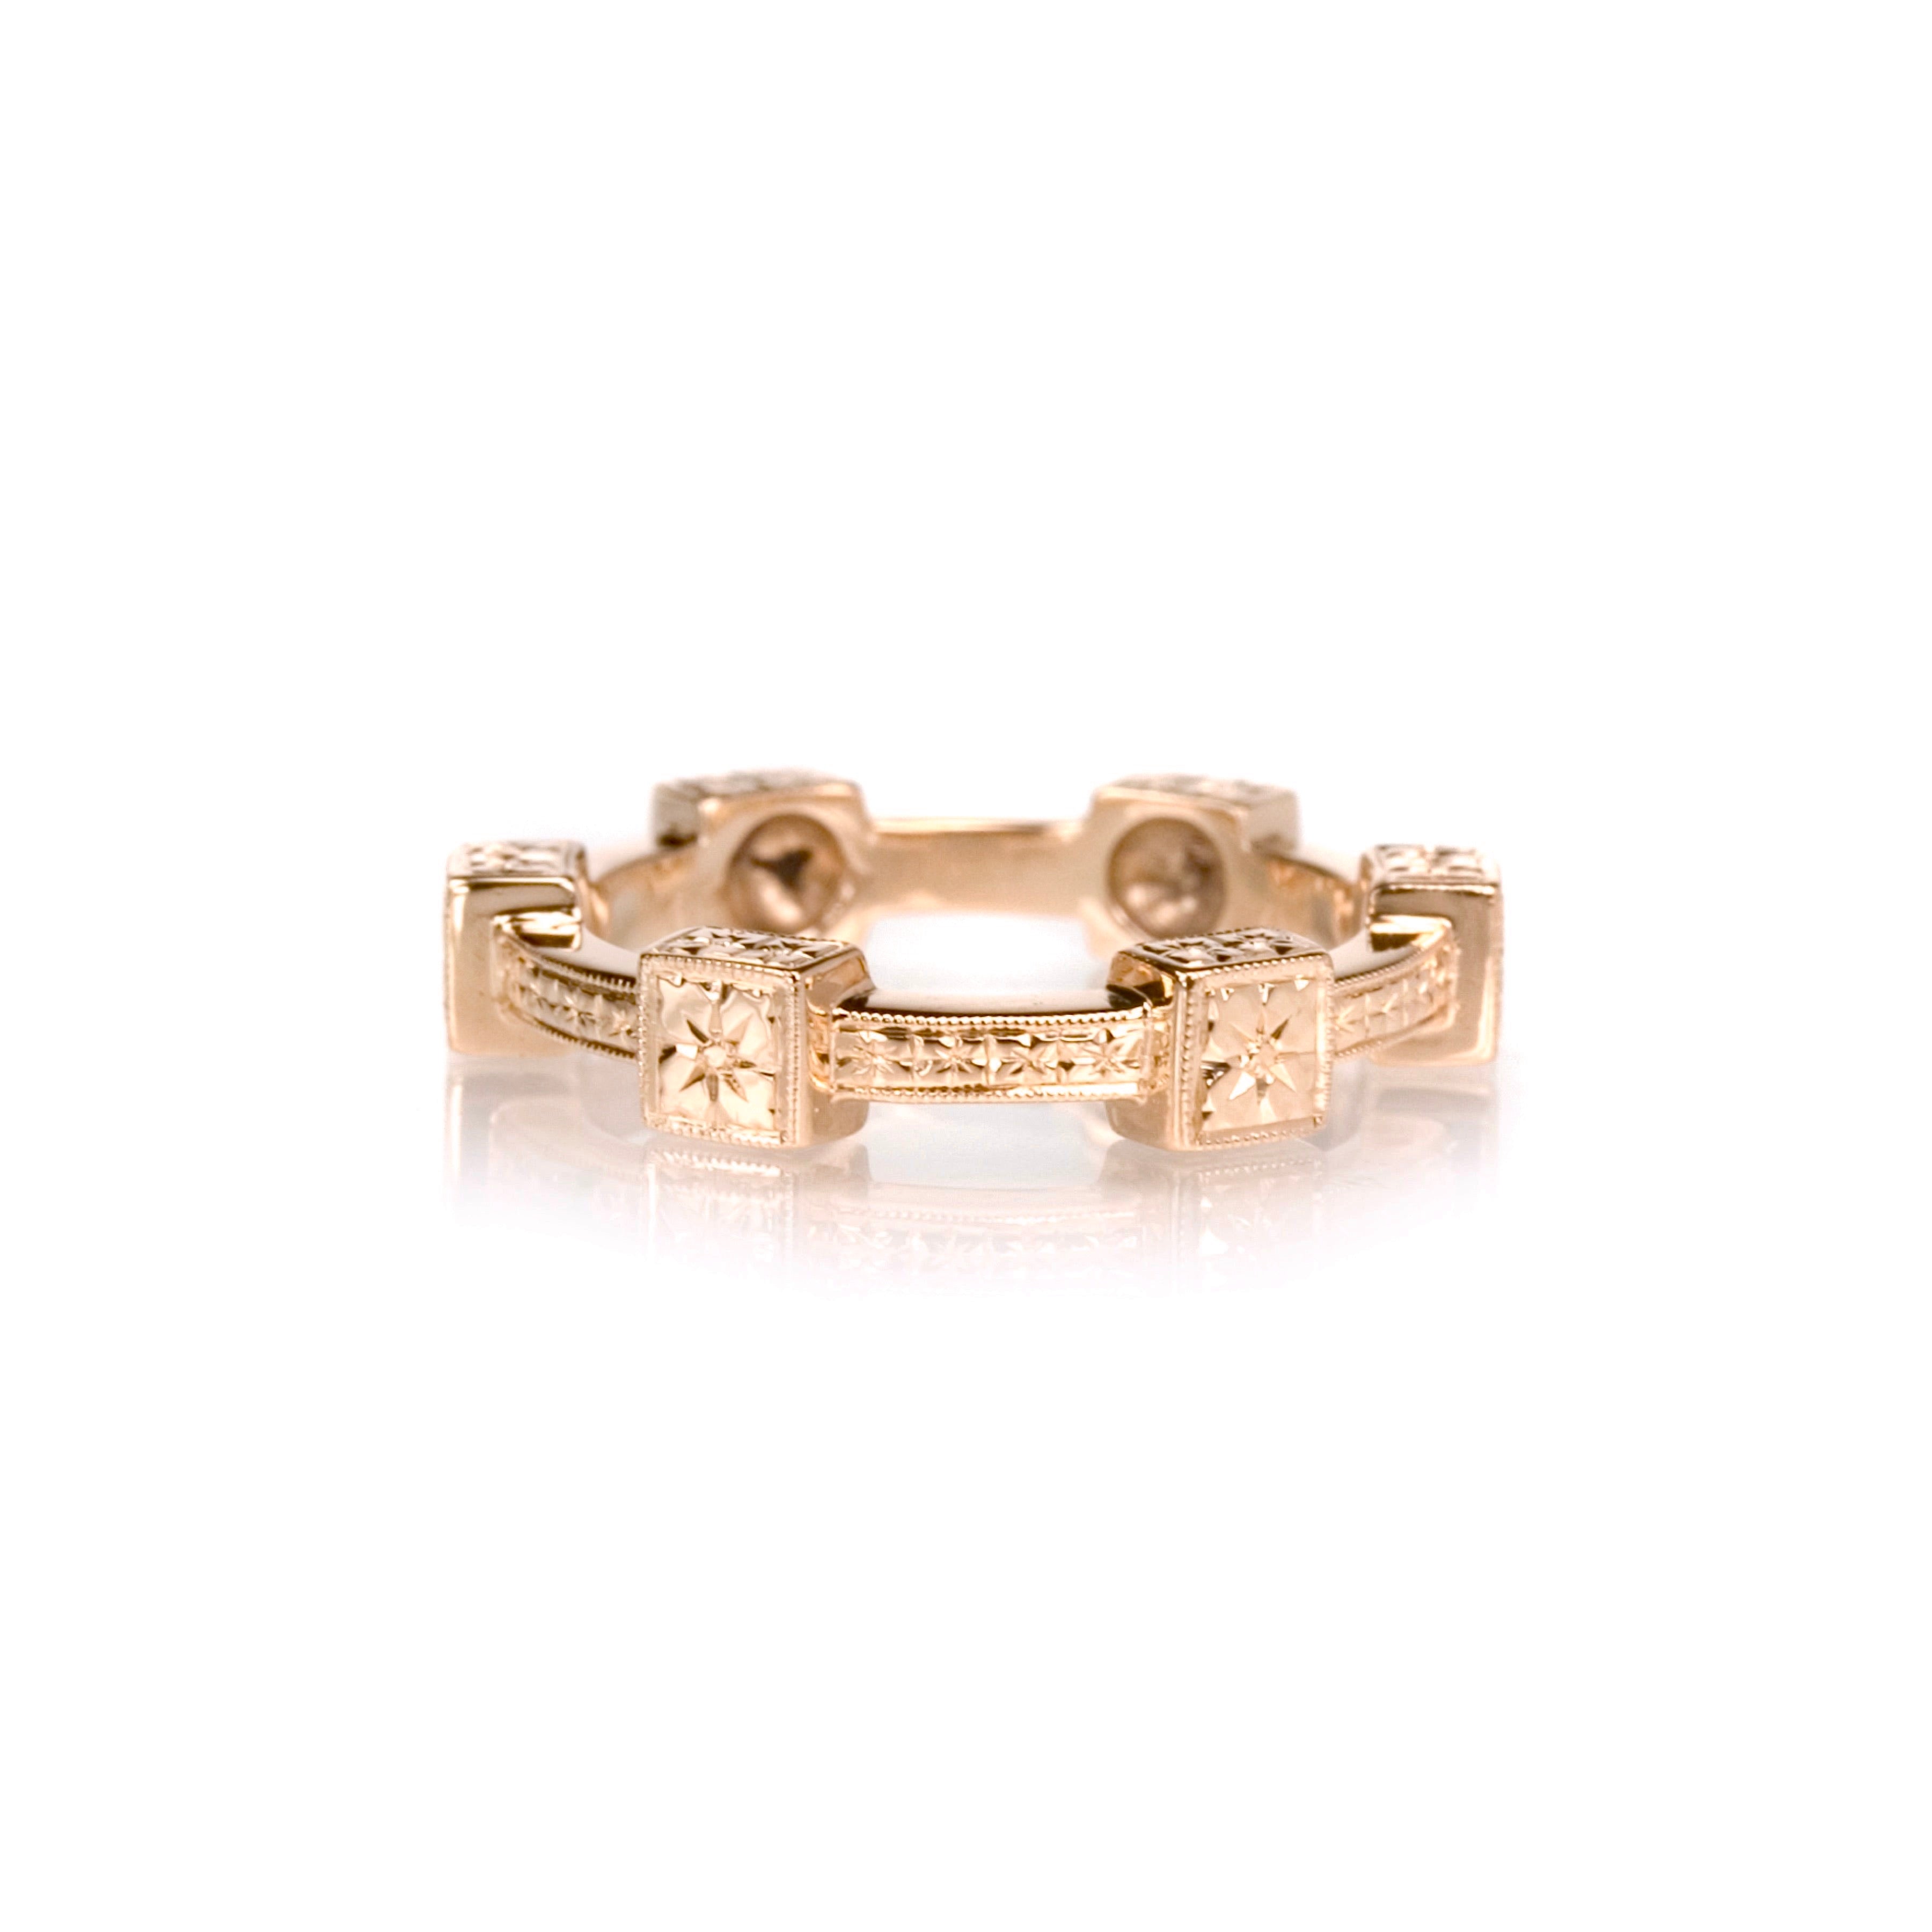 Crafted in 14KT rose gold, this ring features orange blossom hand-engravings in square settings and on the band. 